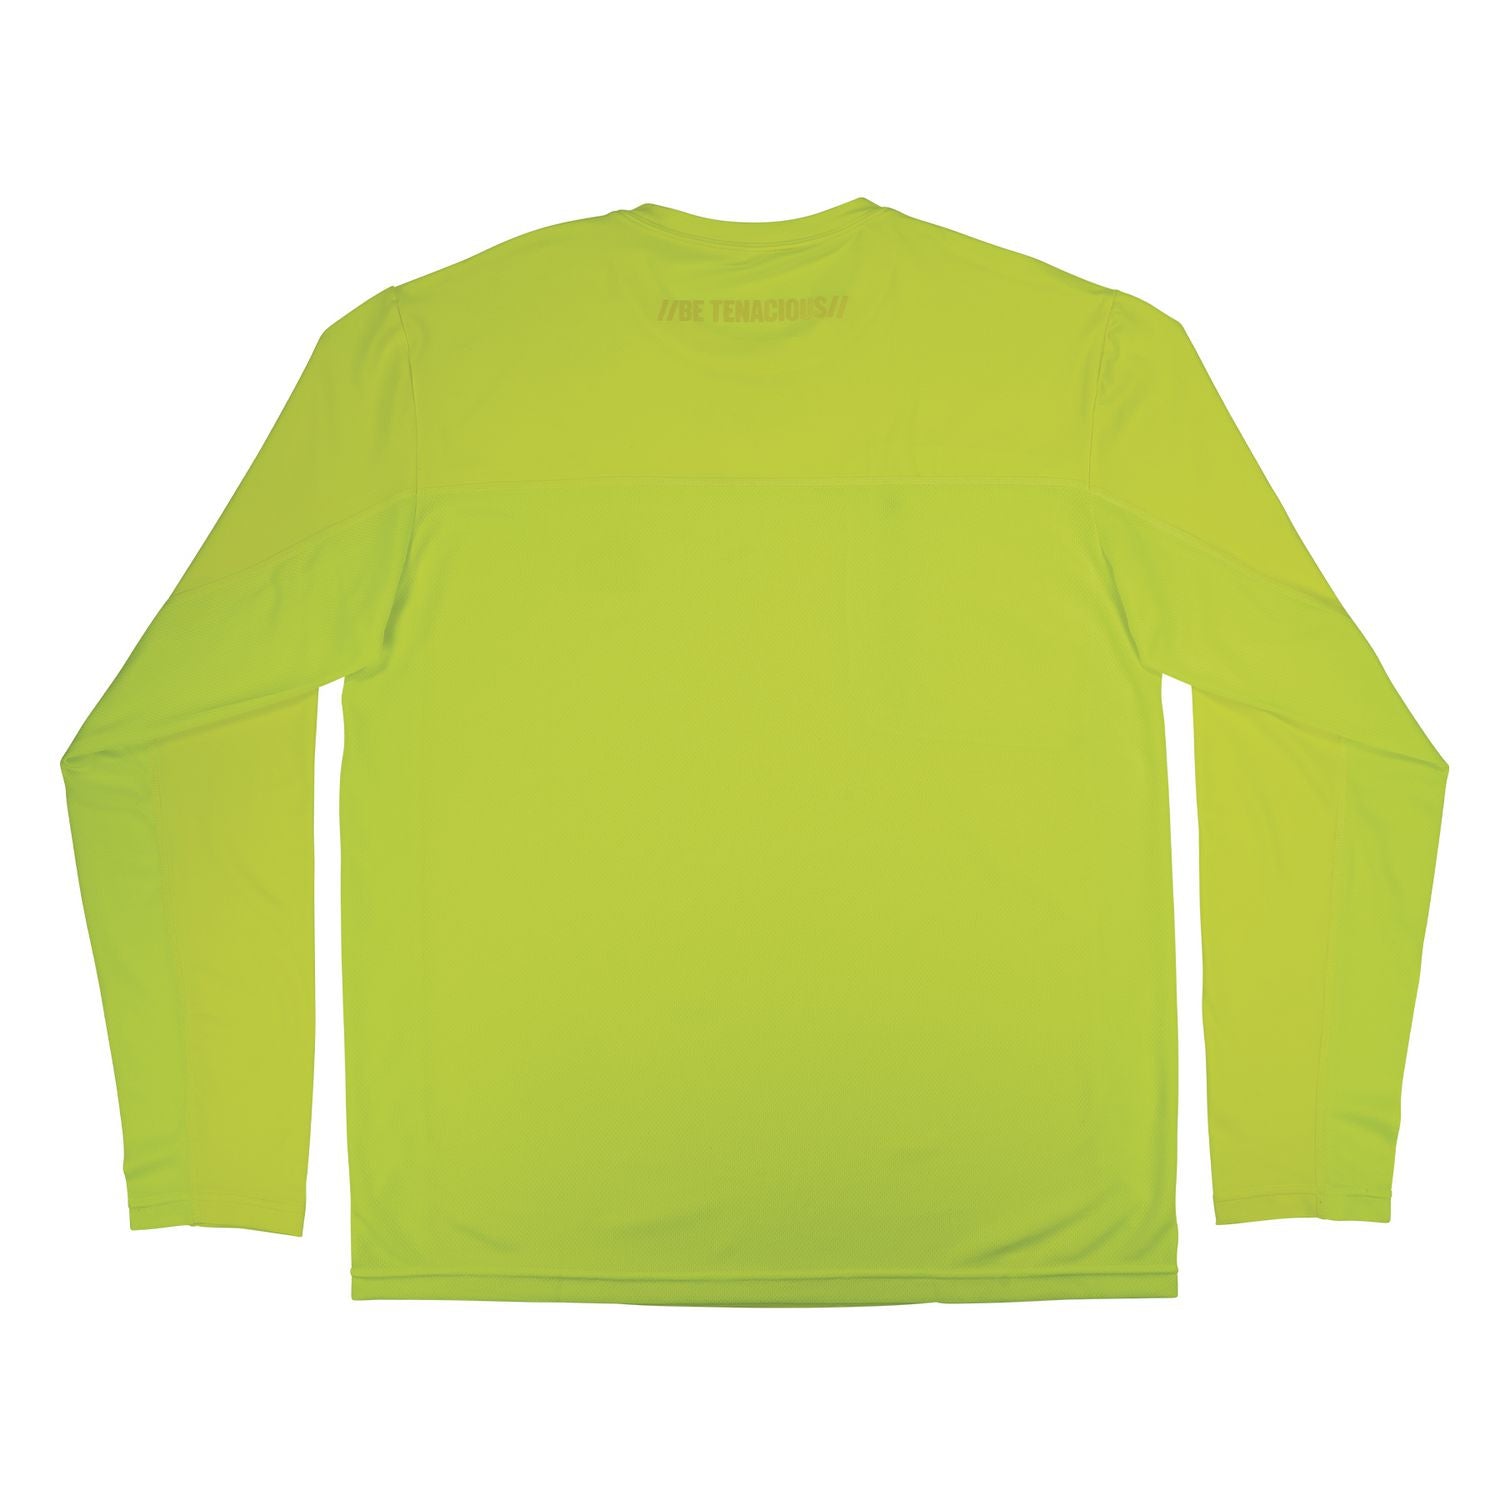 chill-its-6689-cooling-long-sleeve-sun-shirt-with-uv-protection-large-lime-ships-in-1-3-business-days_ego12144 - 2